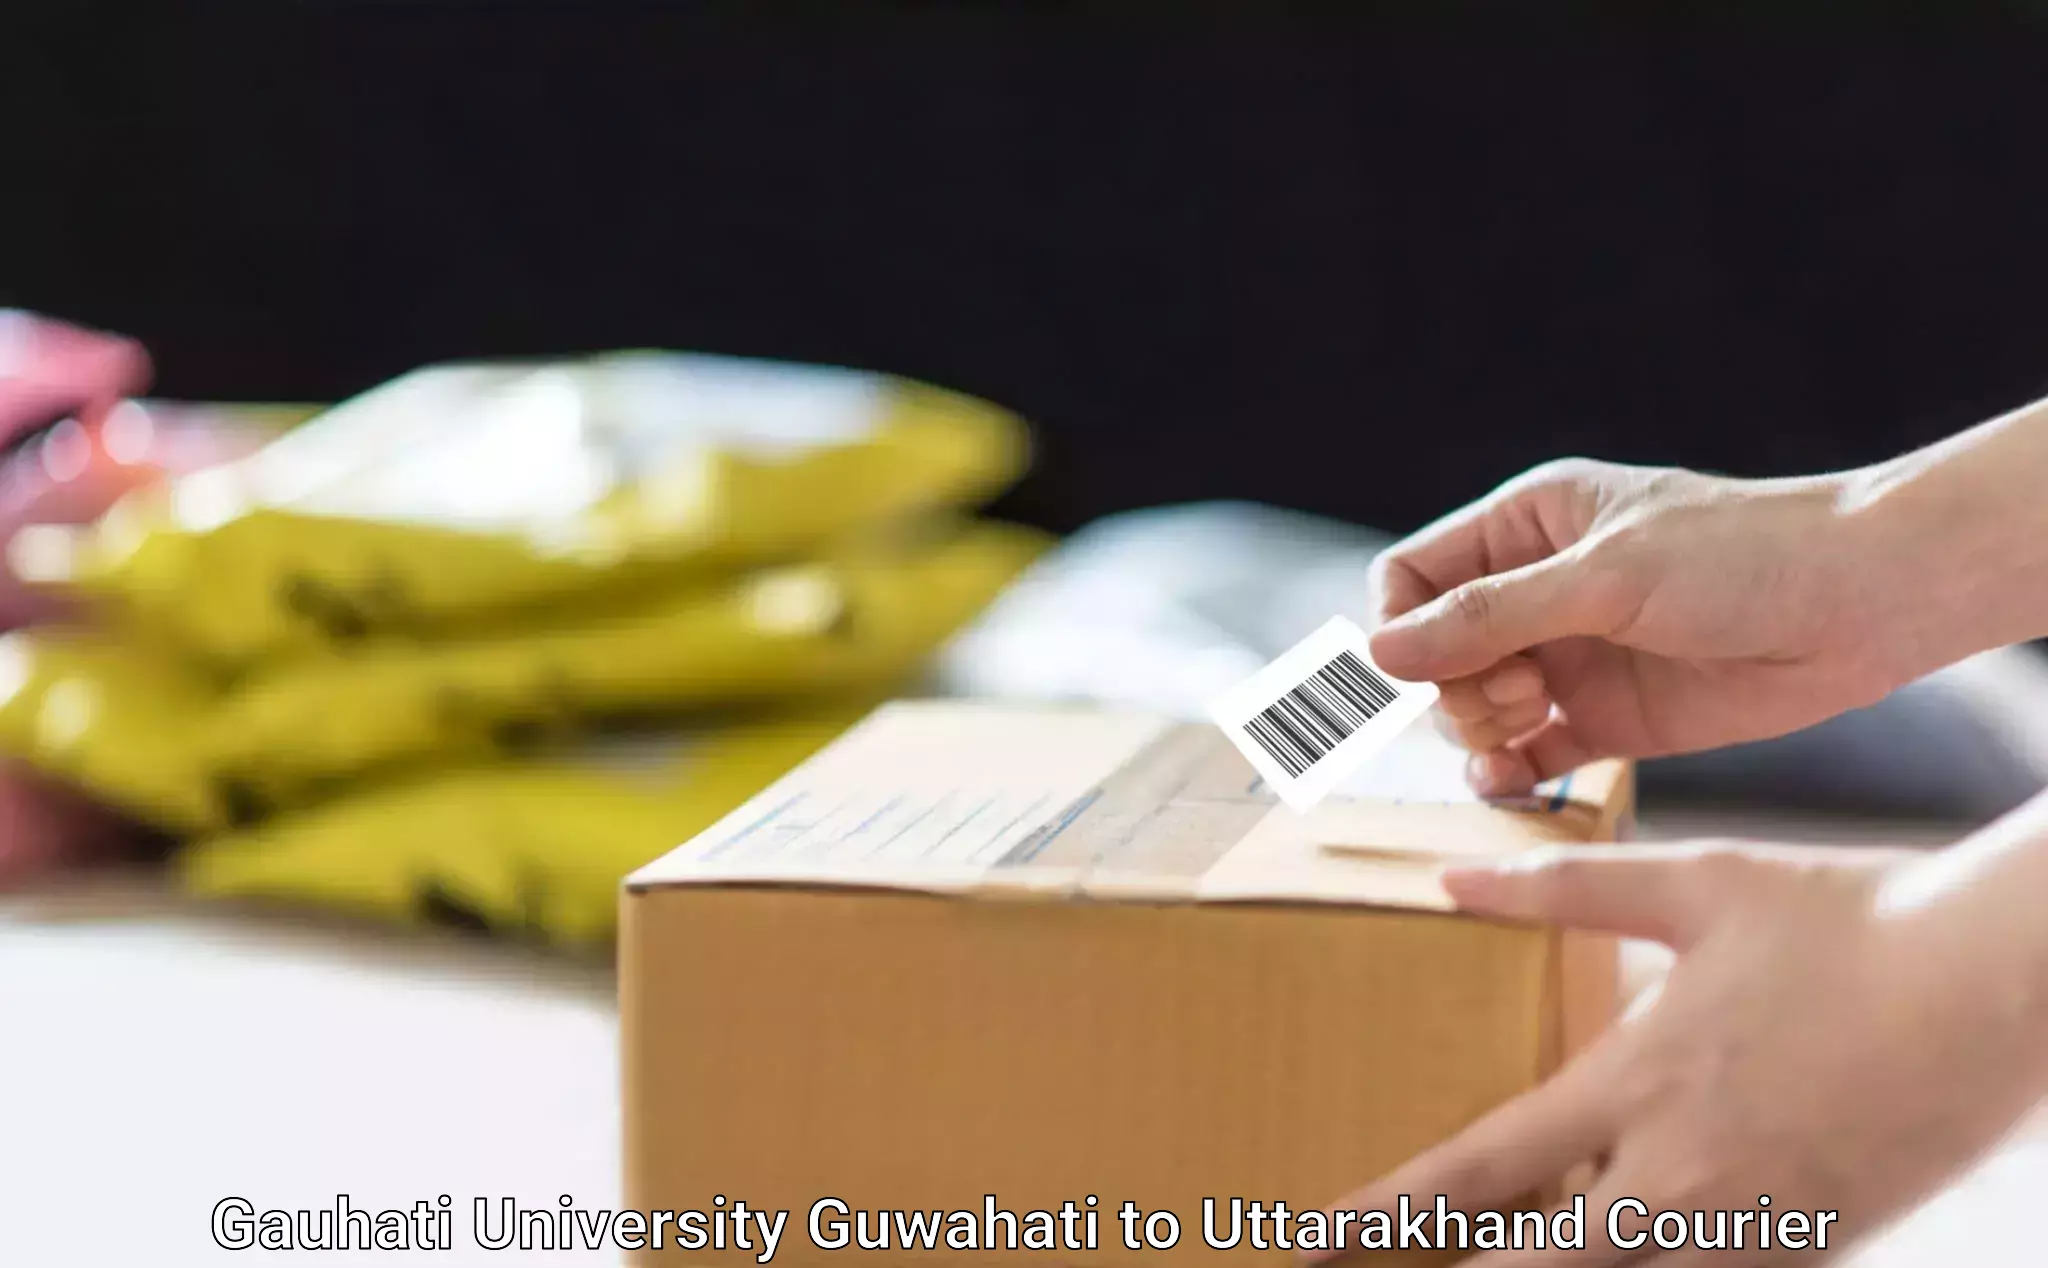 High-quality delivery services in Gauhati University Guwahati to Mussoorie